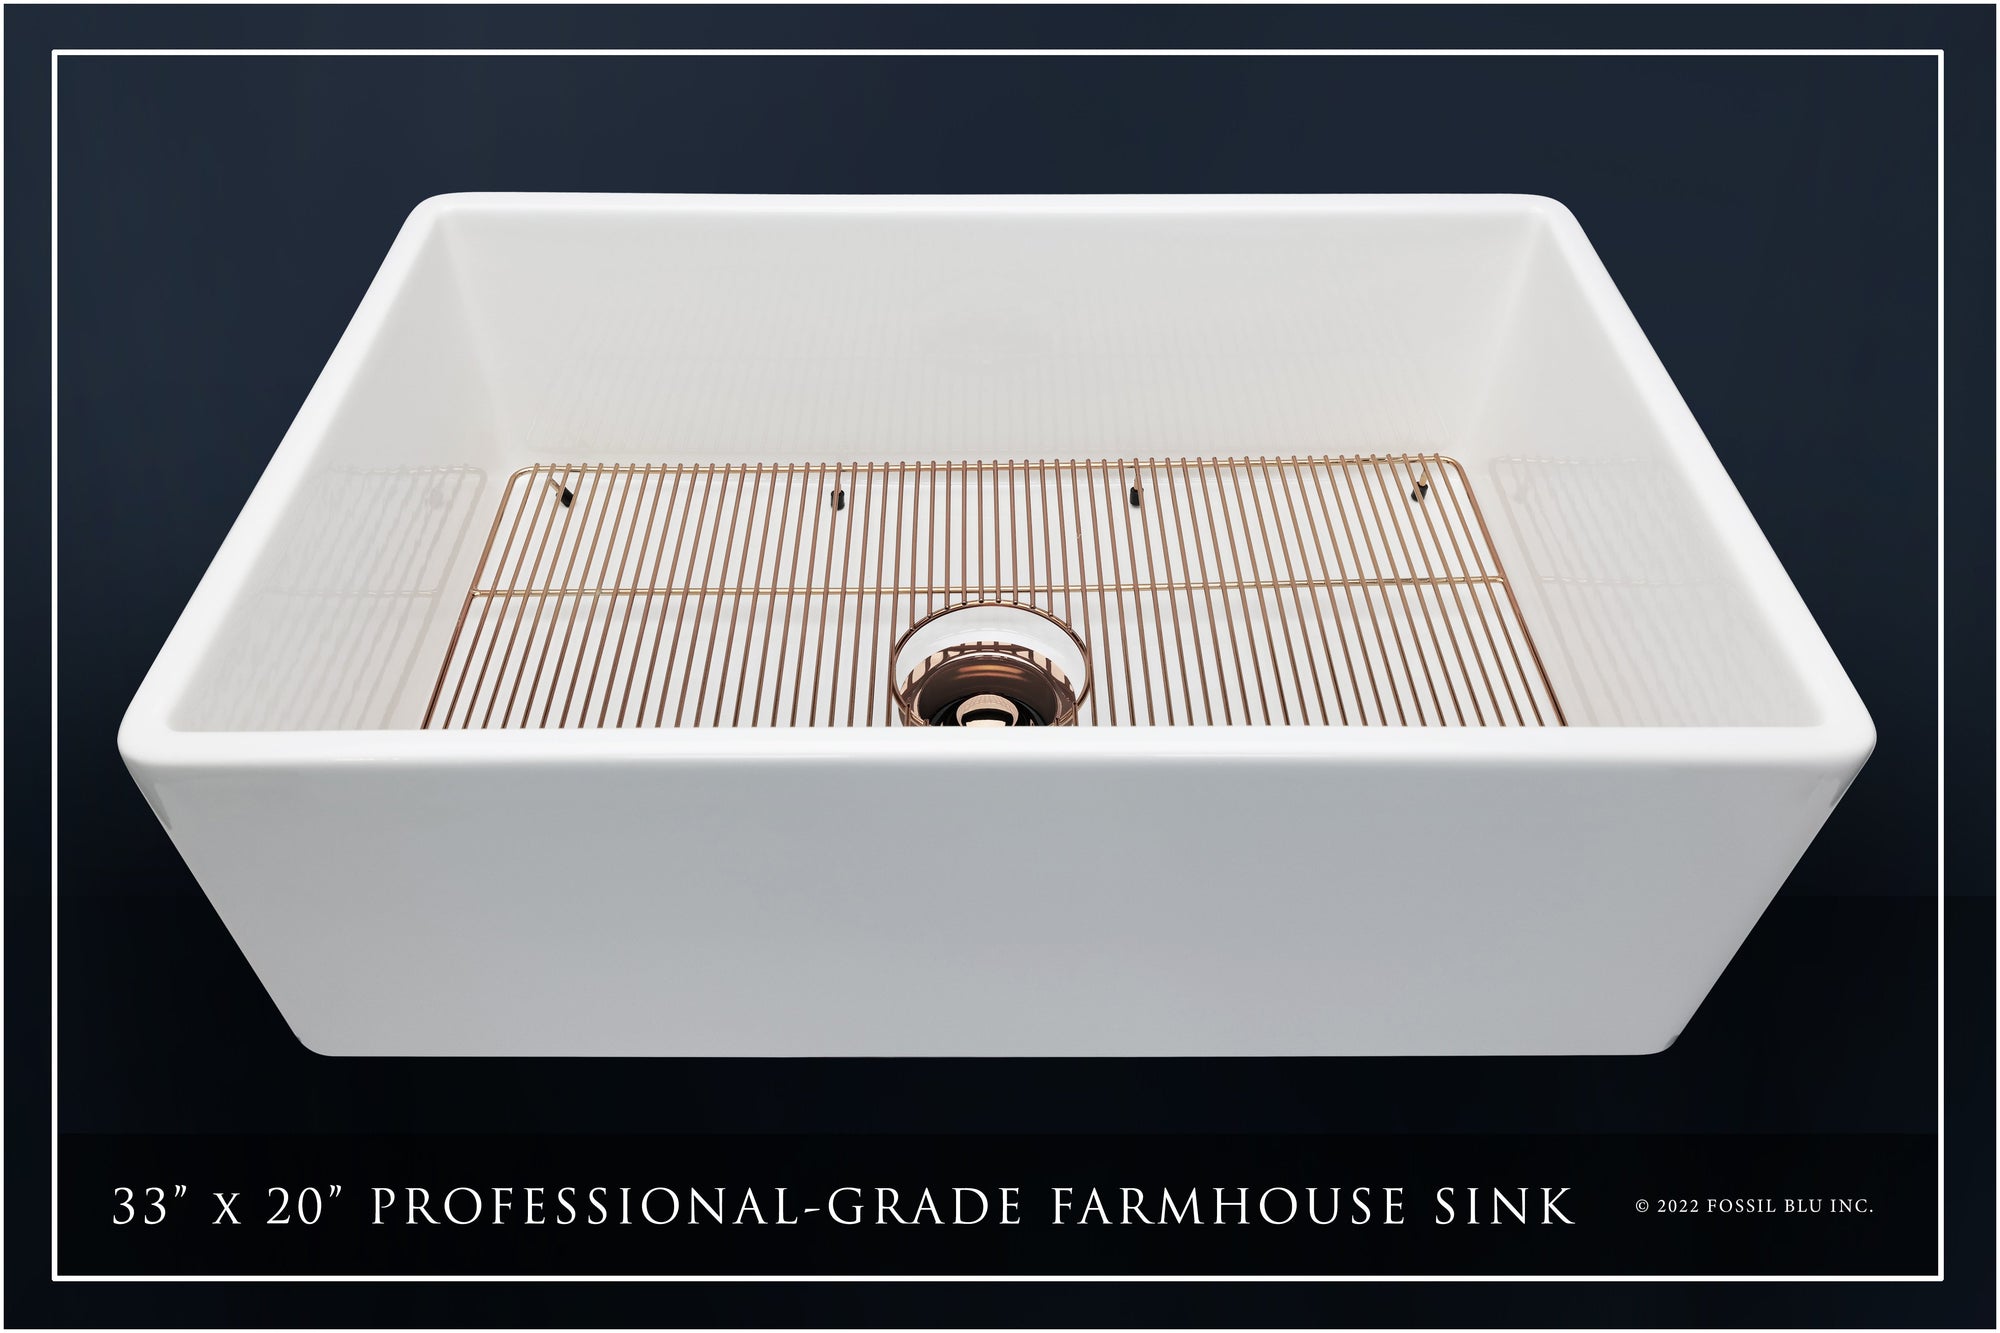 FSW1002RG LUXURY 33-INCH SOLID FIRECLAY FARMHOUSE SINK IN WHITE, POL. ROSE GOLD ACCS, FLAT FRONT